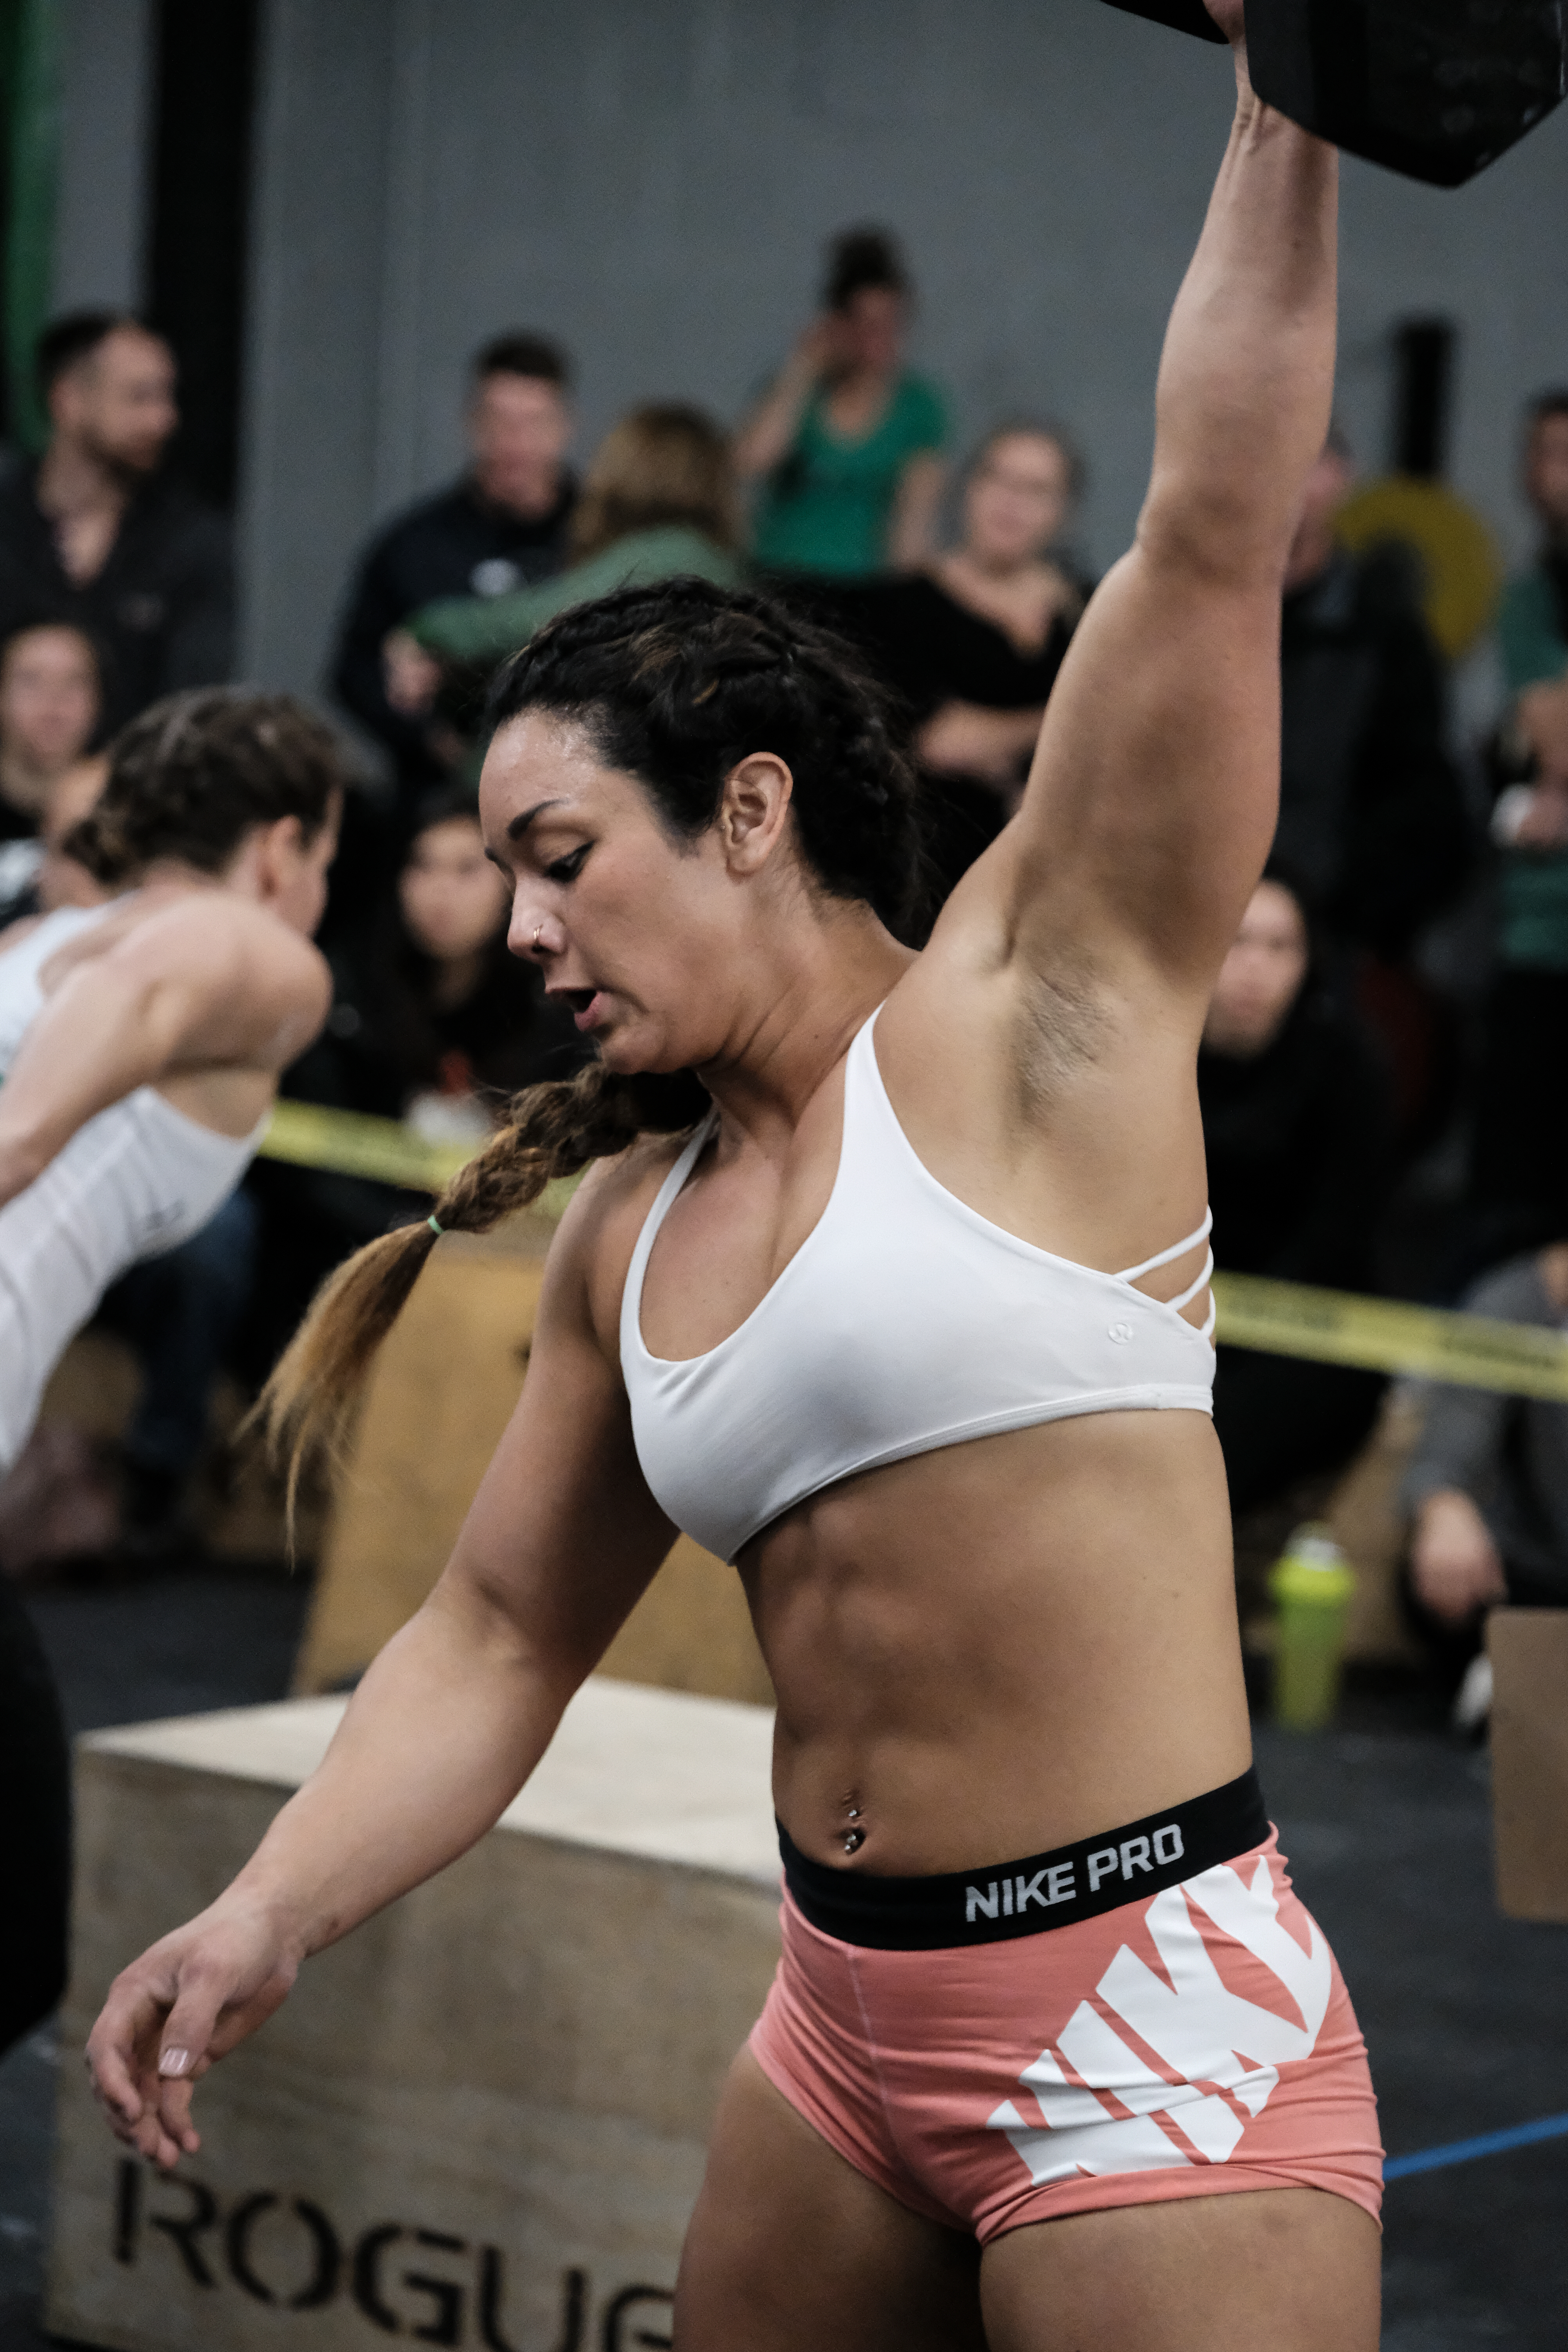 Strong & Beautiful: How Weightlifting Is Improving the Self-Image